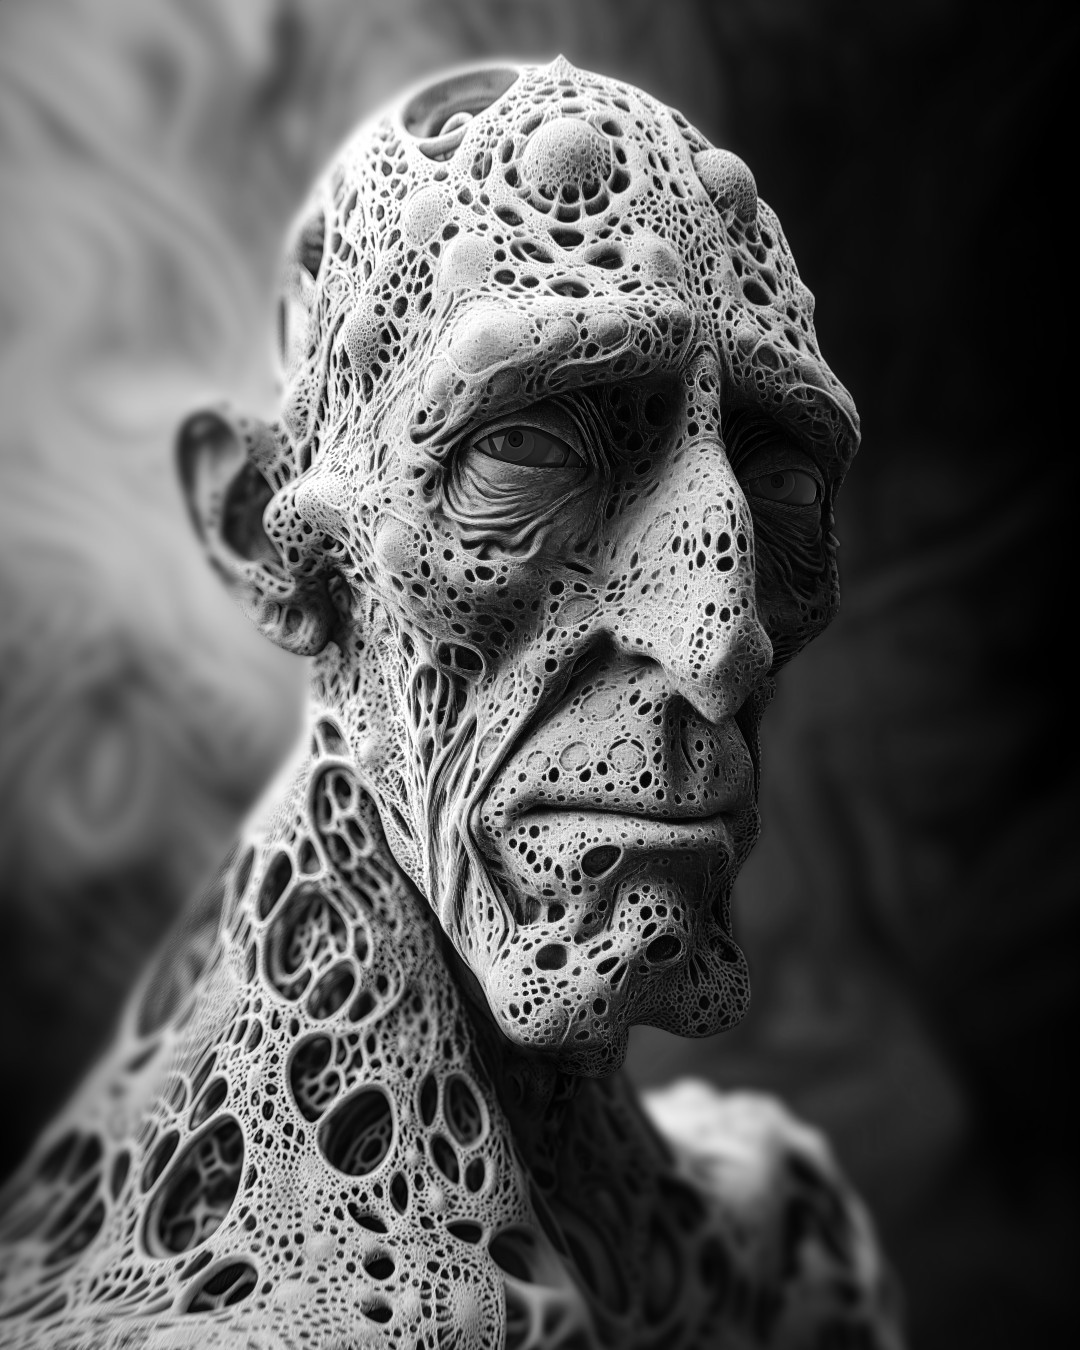 Old man, distorted organic formations, monochrome